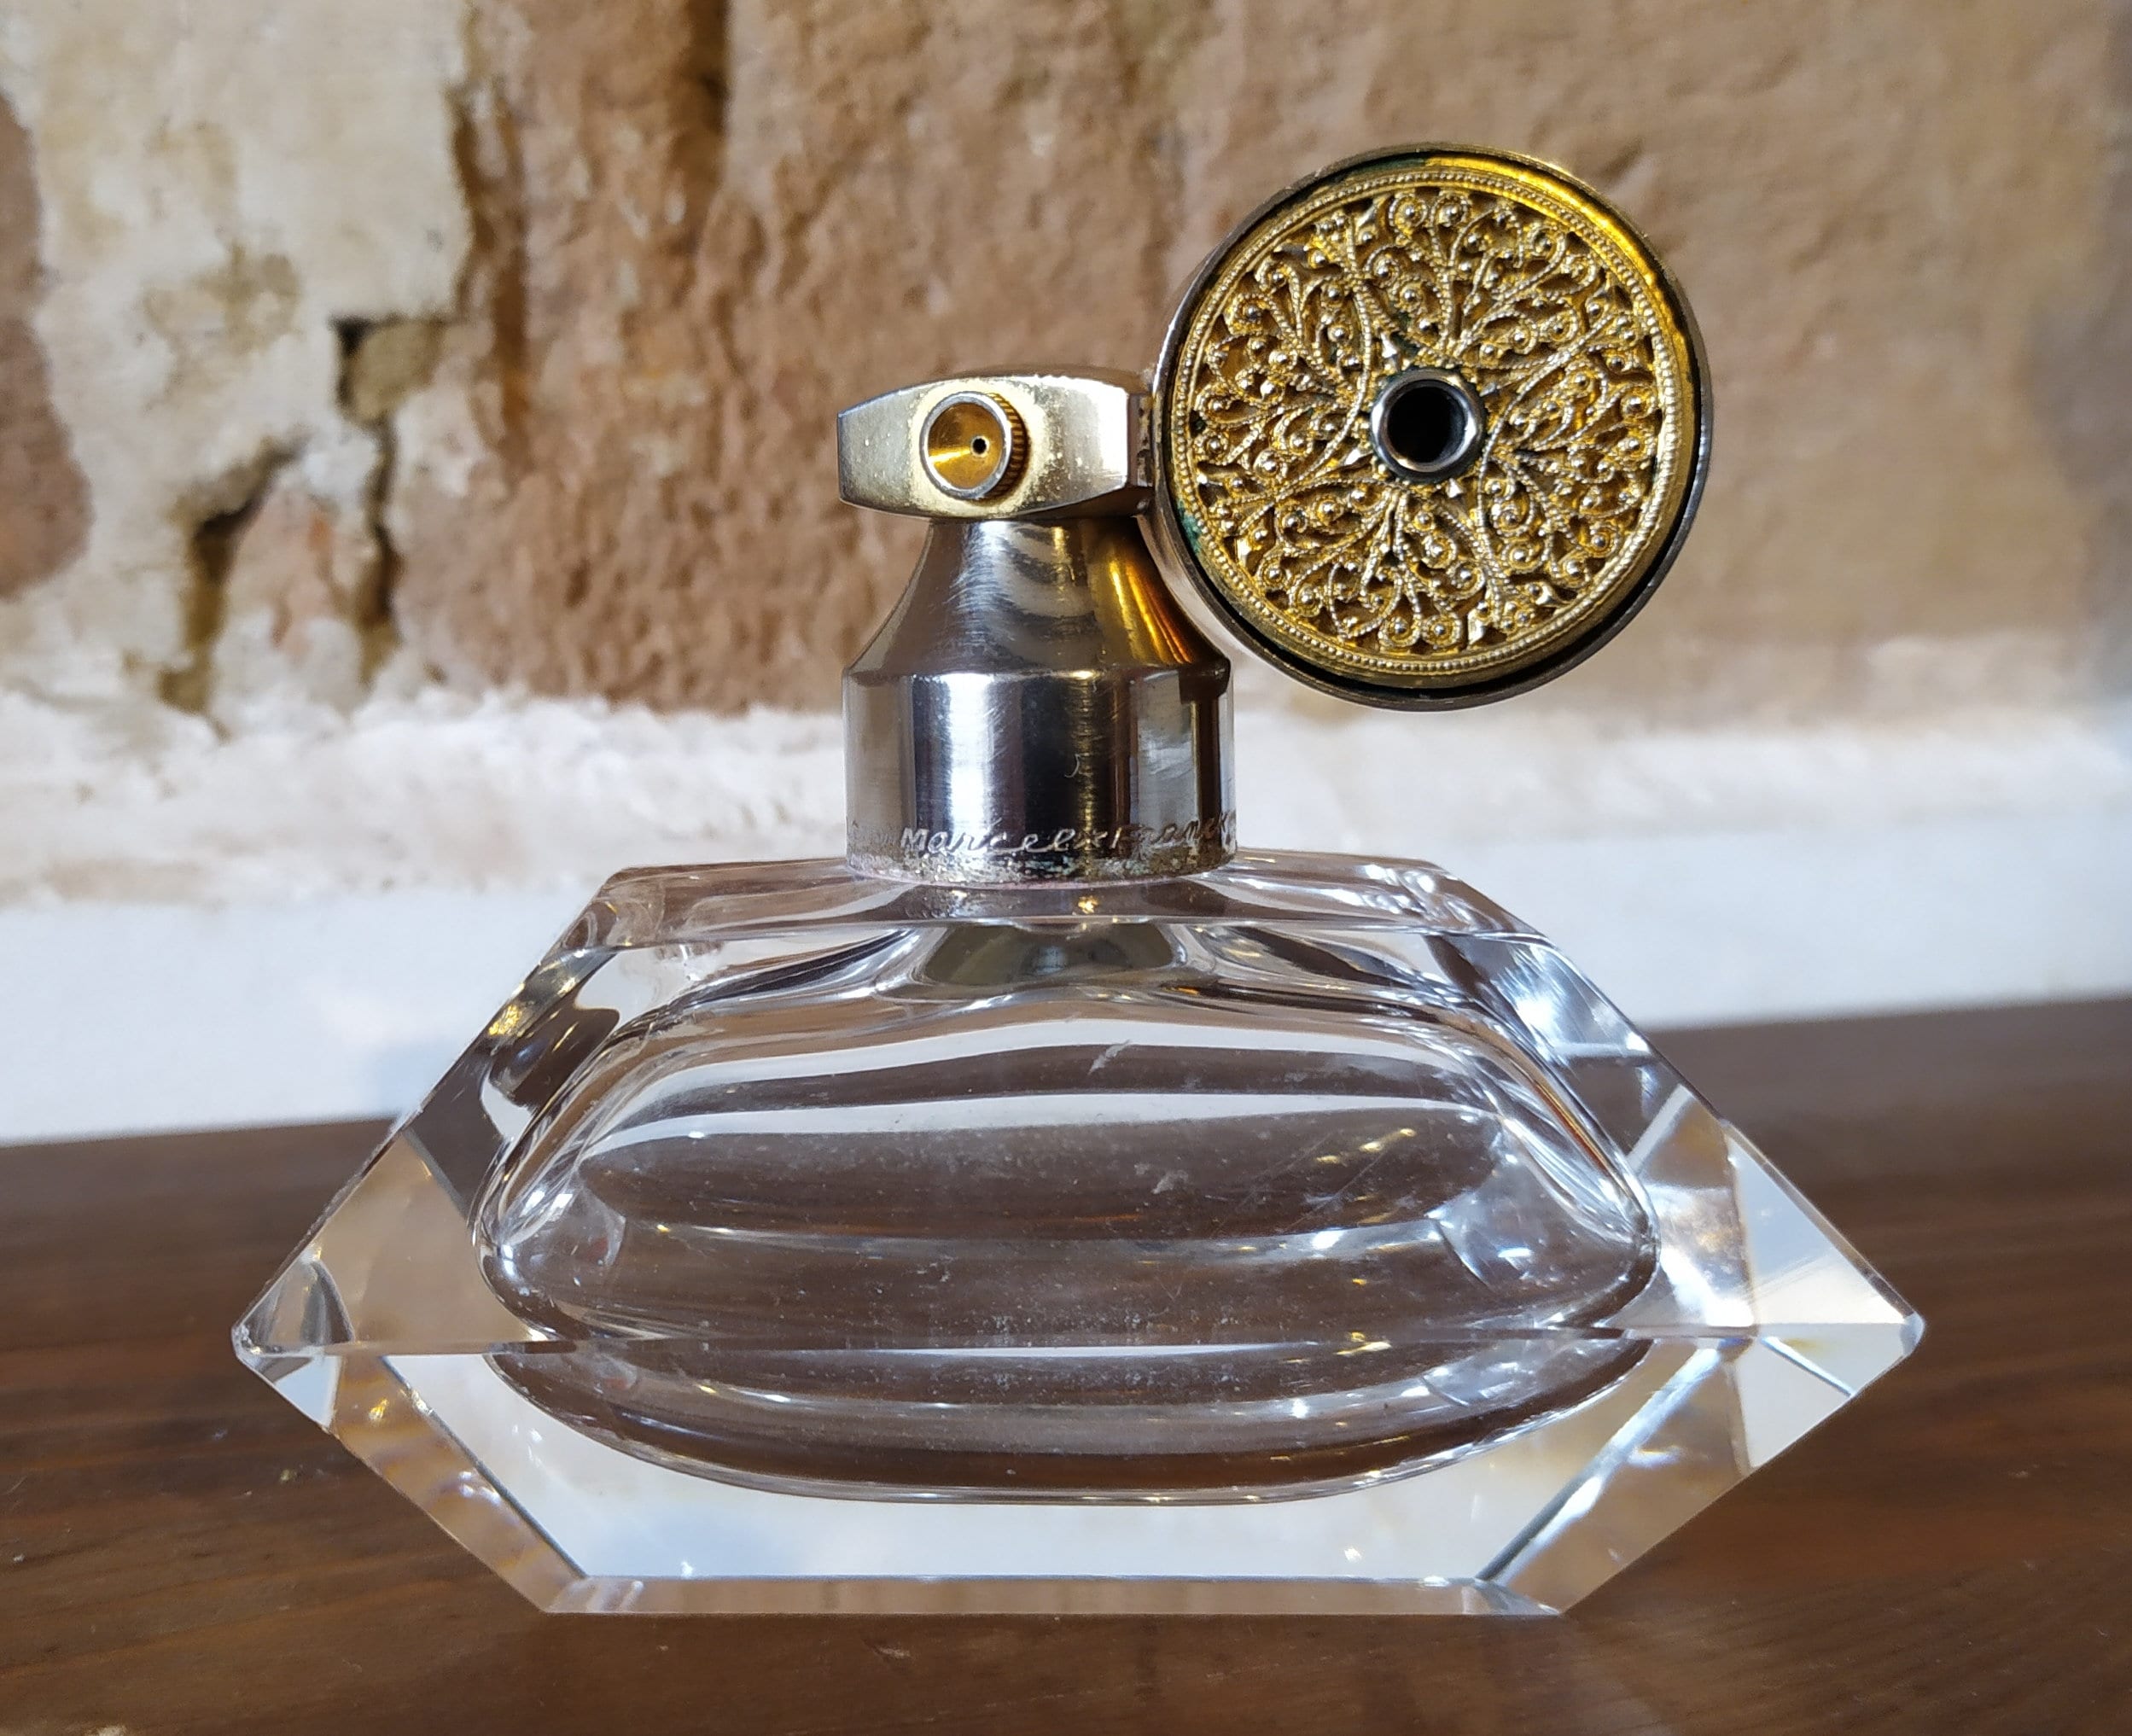 Midcentury Baccarat Perfume Atomizer by Marcel Franck, Escale